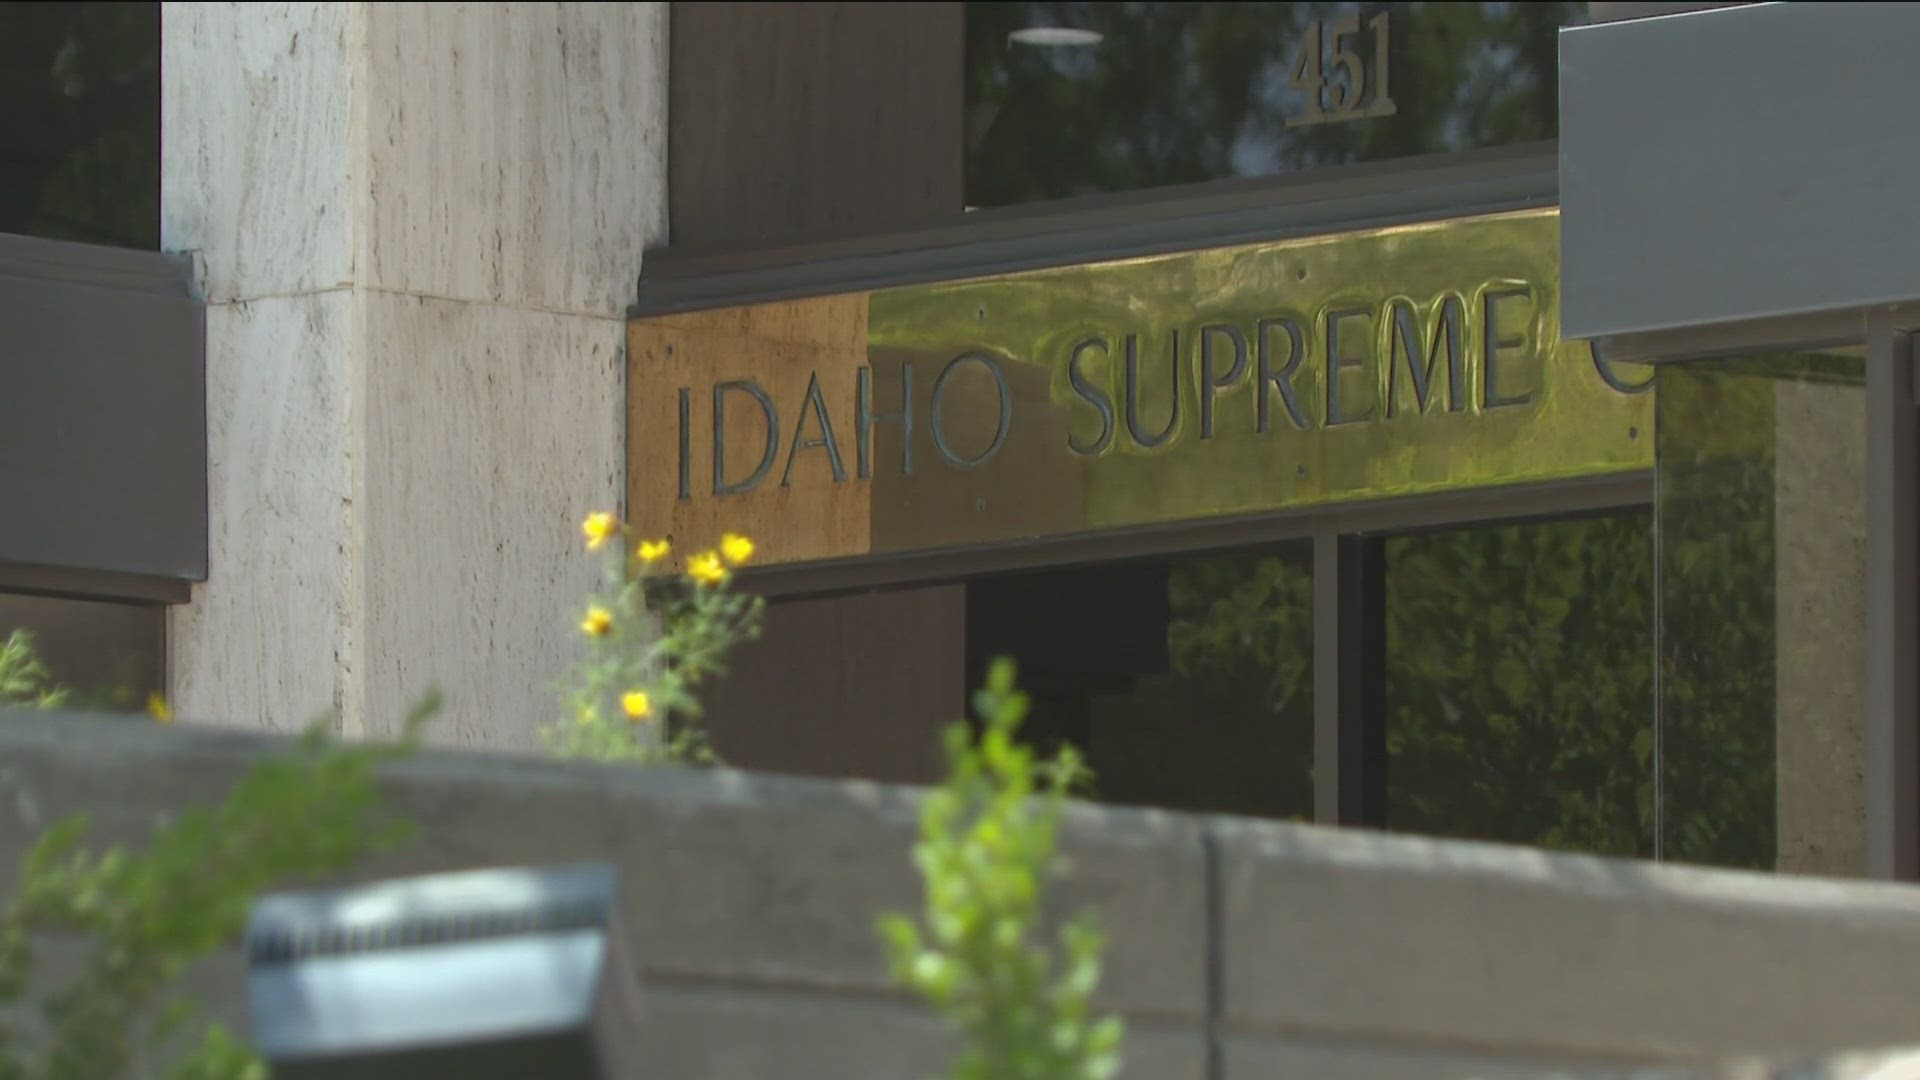 Babe Vote and the League of Women Voters filed the lawsuit against Idaho Secretary of State Phil McGrane over laws passed in 2023.